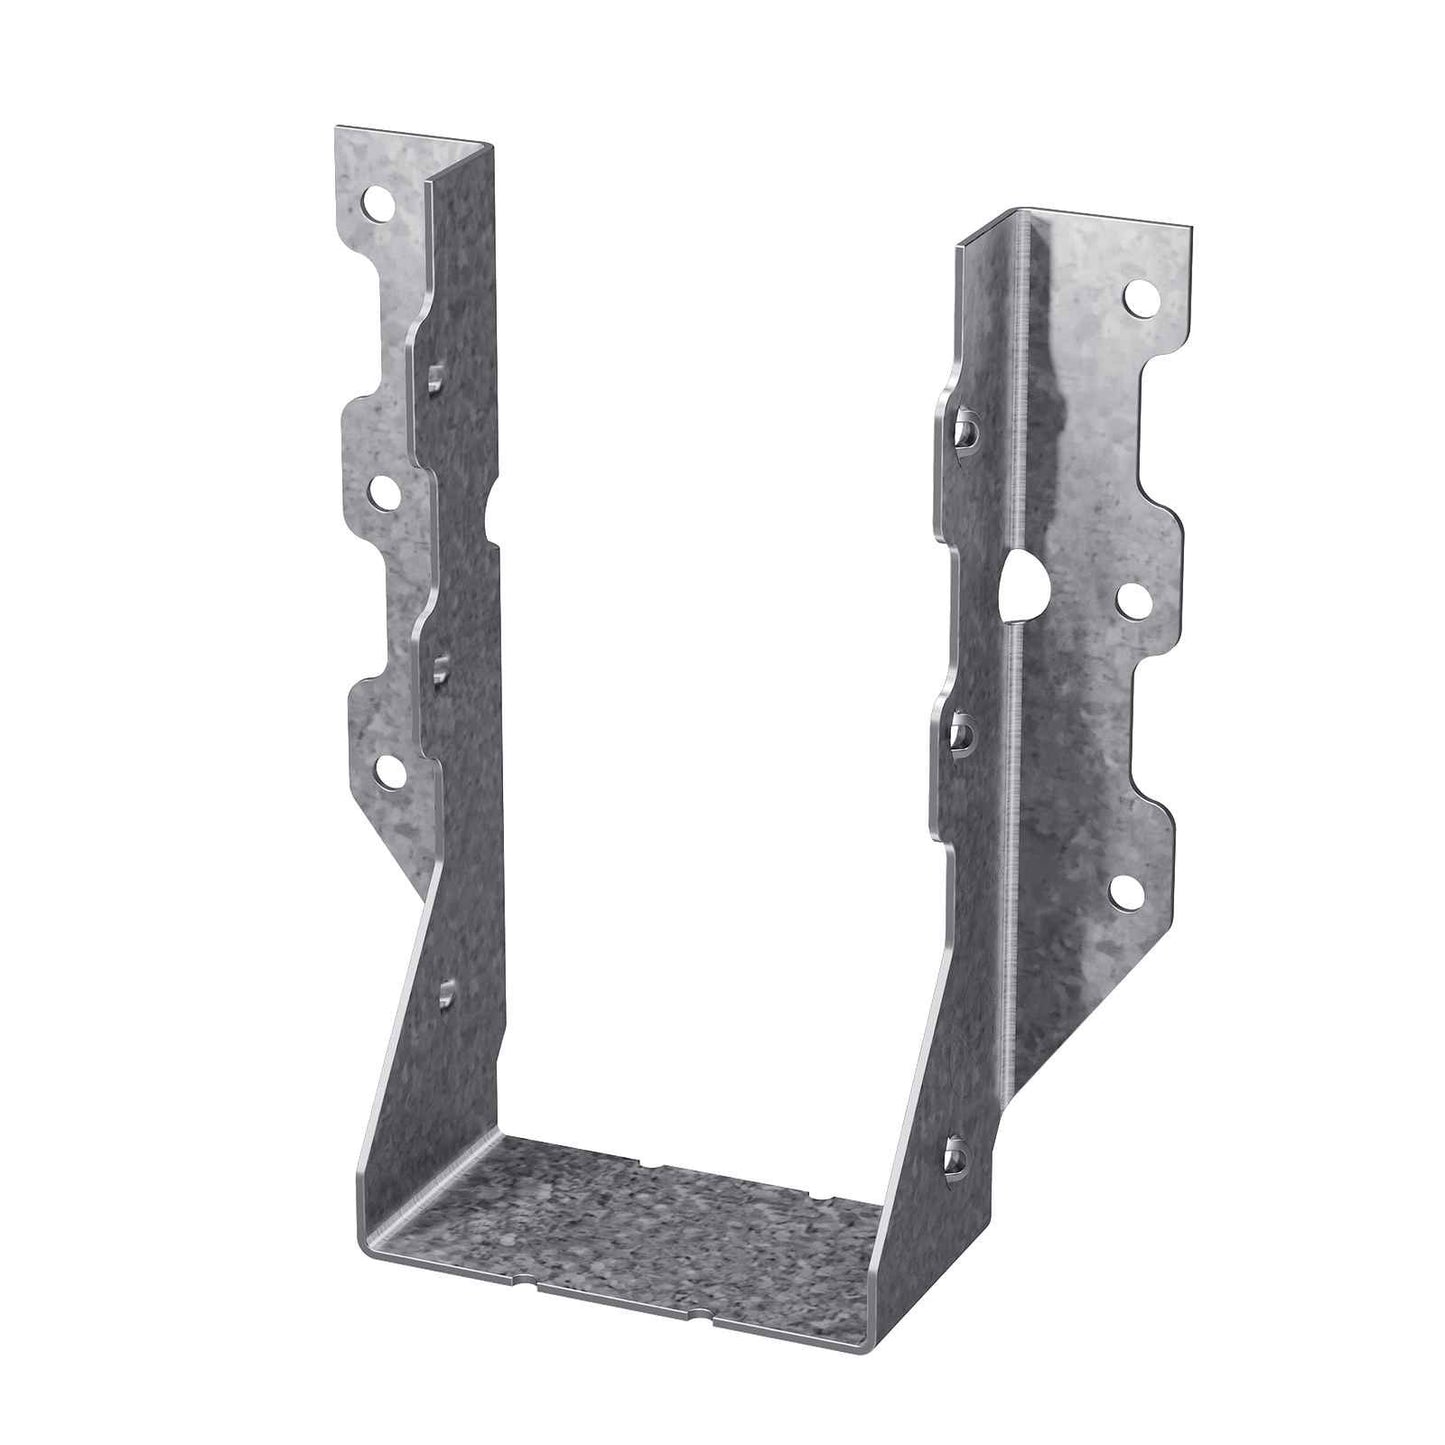 Simpson HUS48SS Heavy Top-Flange Hanger with Concealed Flanges - Stainless Steel